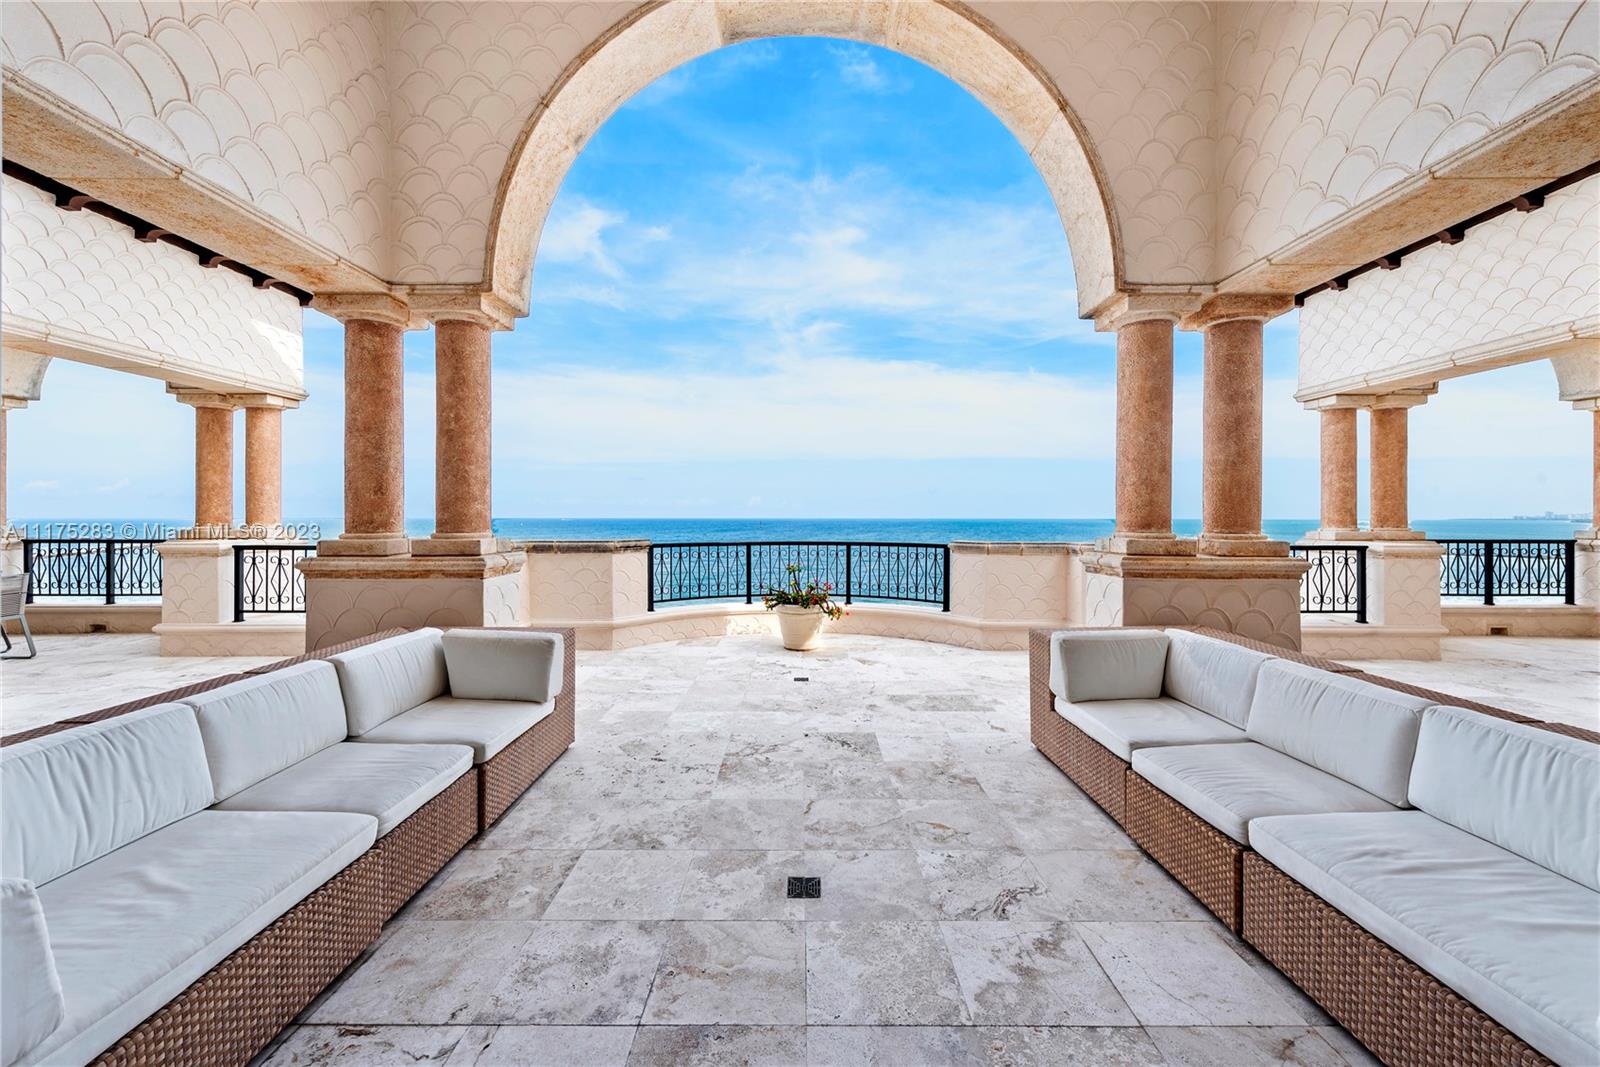 Welcome to your Palace in the Sky! Truly a once in a lifetime opportunity to own this luxurious 6-bdrms, 6/2 baths Oceanfront penthouse property on Fisher Island. Featuring a dramatic grand entrance with soaring ceilings and sweeping full front views of the Atlantic Ocean. This exquisite “Beachhouse” offers approximately 7,610-sq ft of living space expertly designed by esteemed interior designer. A stunning modern kitchen with stainless steel and high-end appliances including Wolf, Thermador and Miele will bring out your inner chef. This home is complete with every comfort imaginable including split floor plan, luxurious spa bathrooms, media room, two offices and a home
gym. The home features a Kaleidescape home theatre system and state-of-the-art Crestron system.